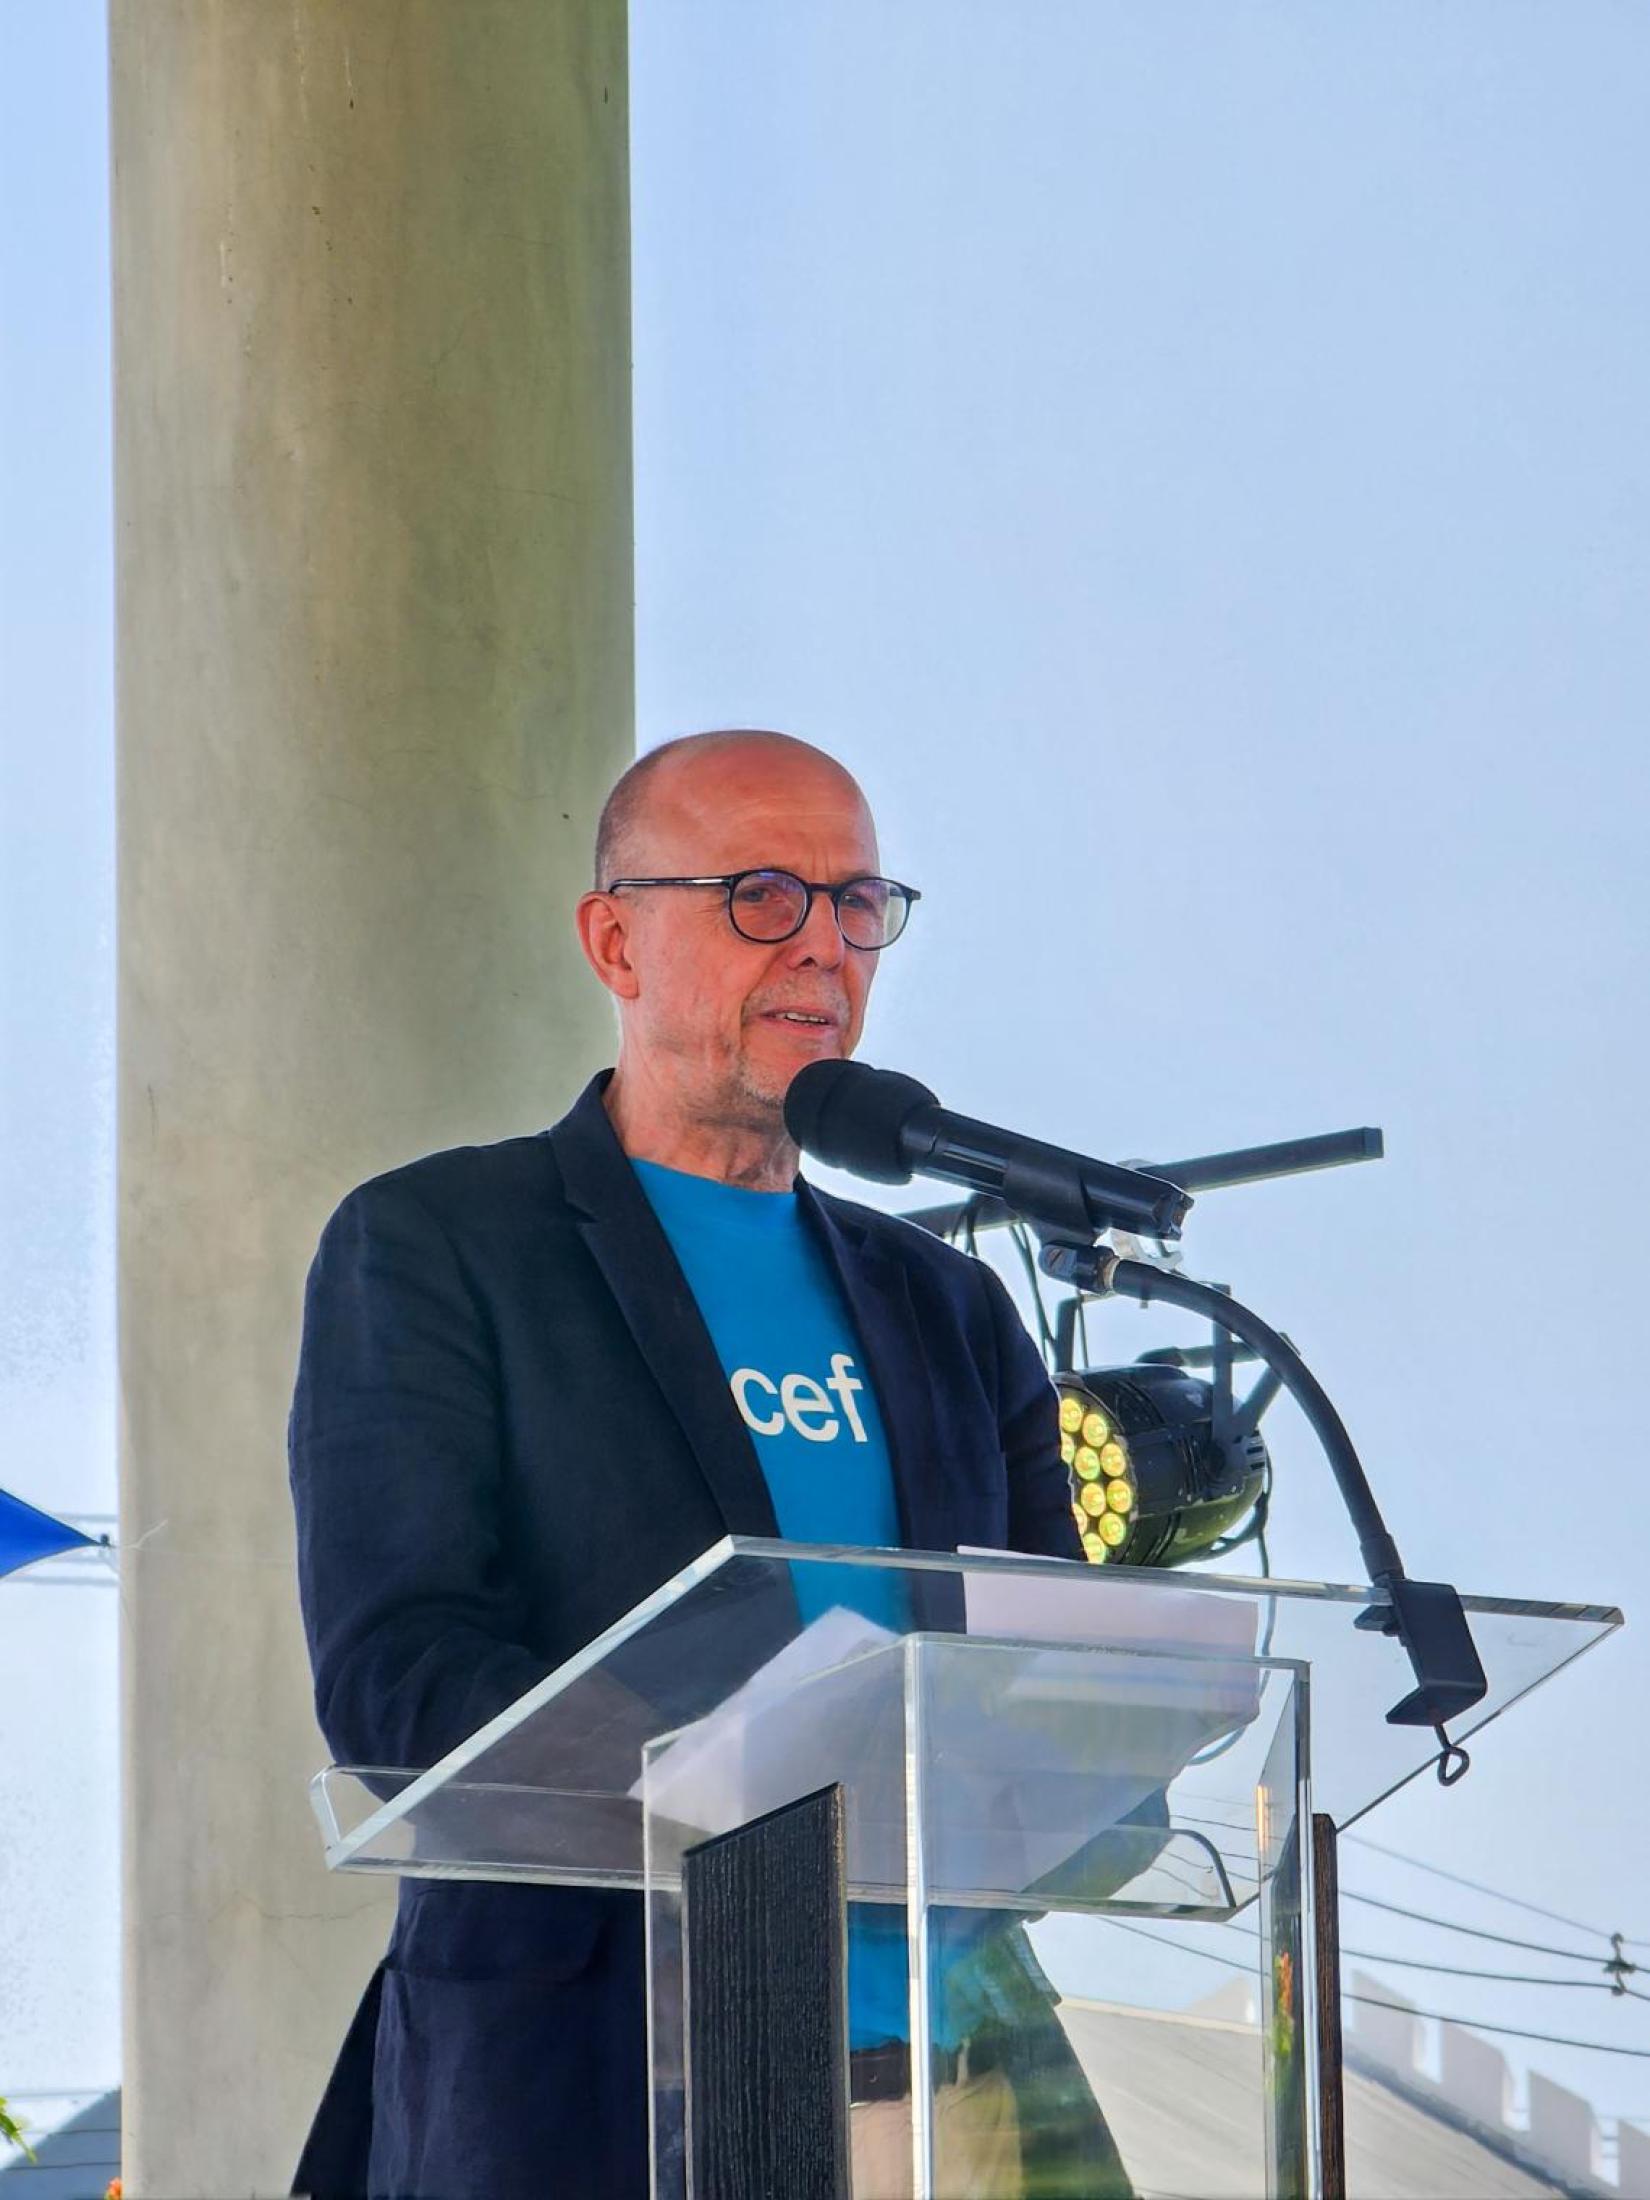 Pieter Bult, UNICEF Representative to the Eastern Caribbean Area, addresses audience at World childrens Day Rally in Barbados